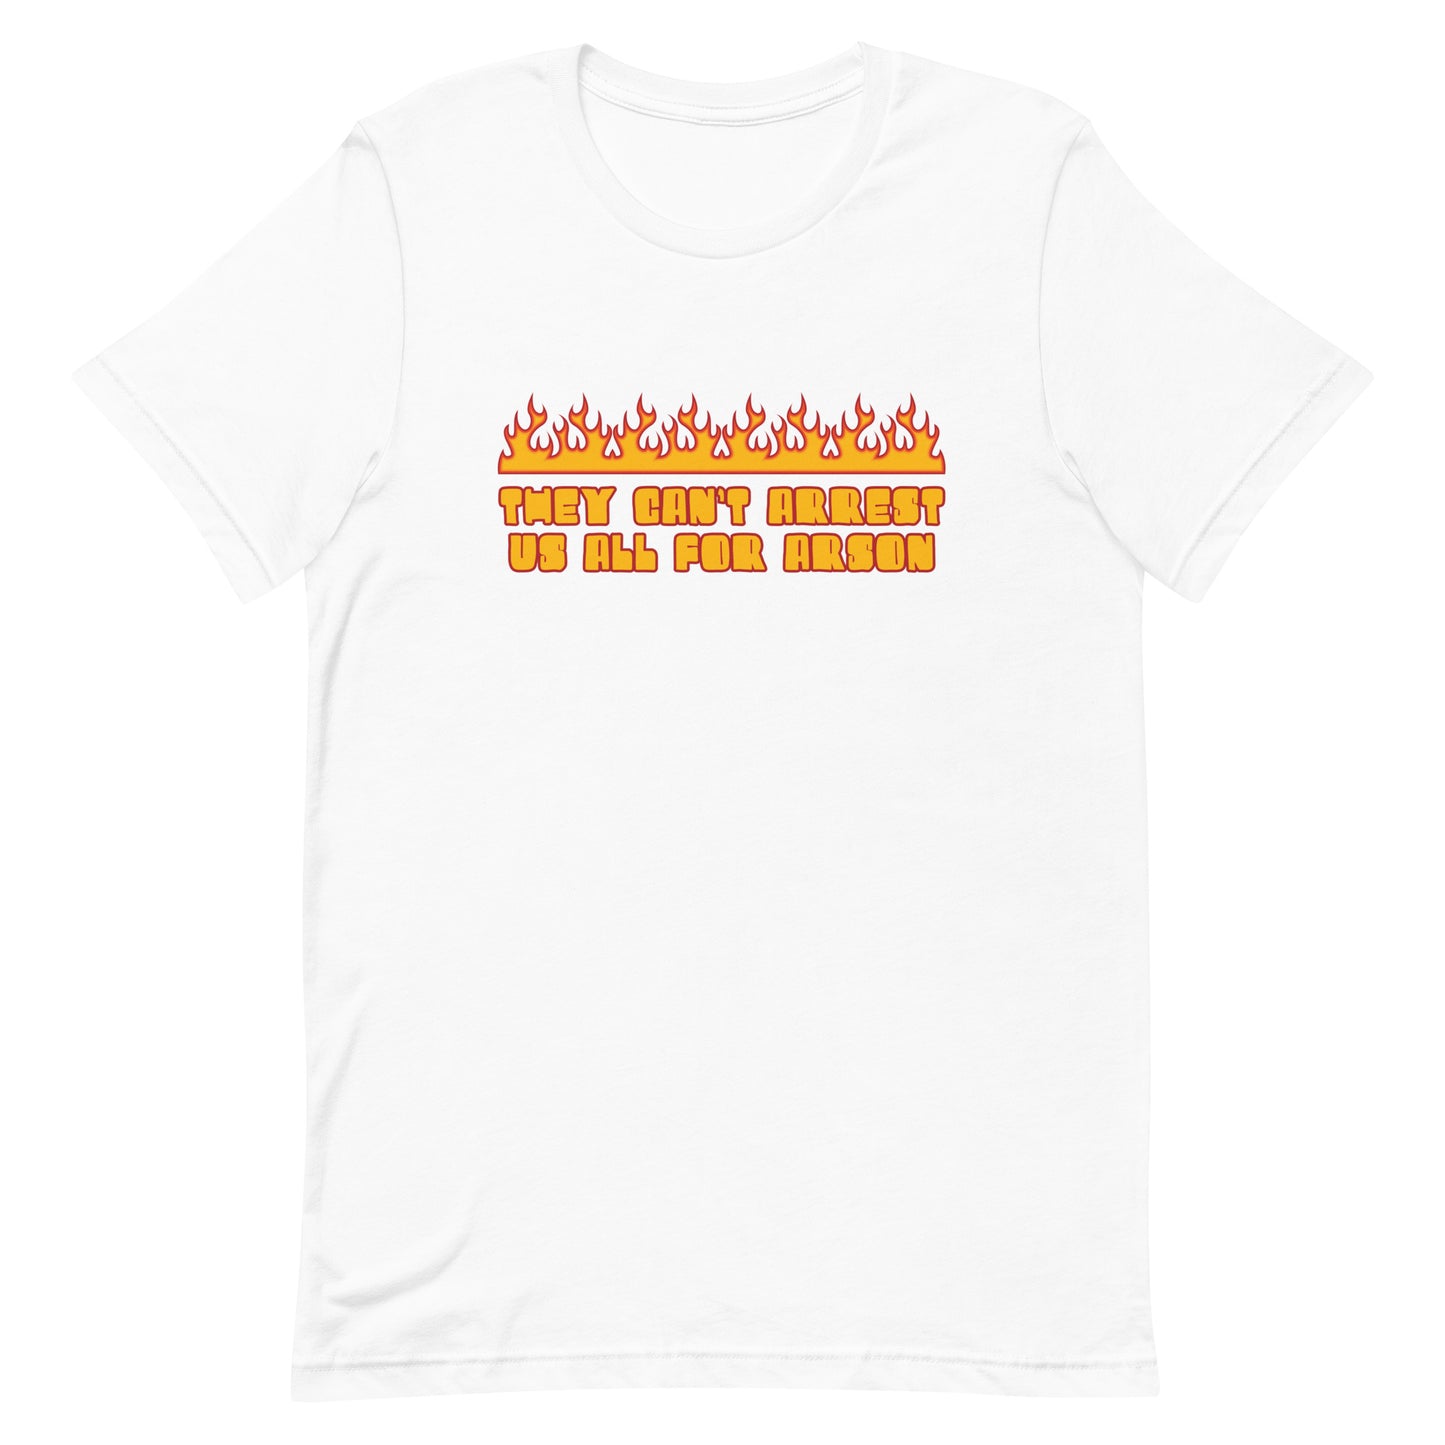 They Can't Arrest Us All For Arson Unisex t-shirt